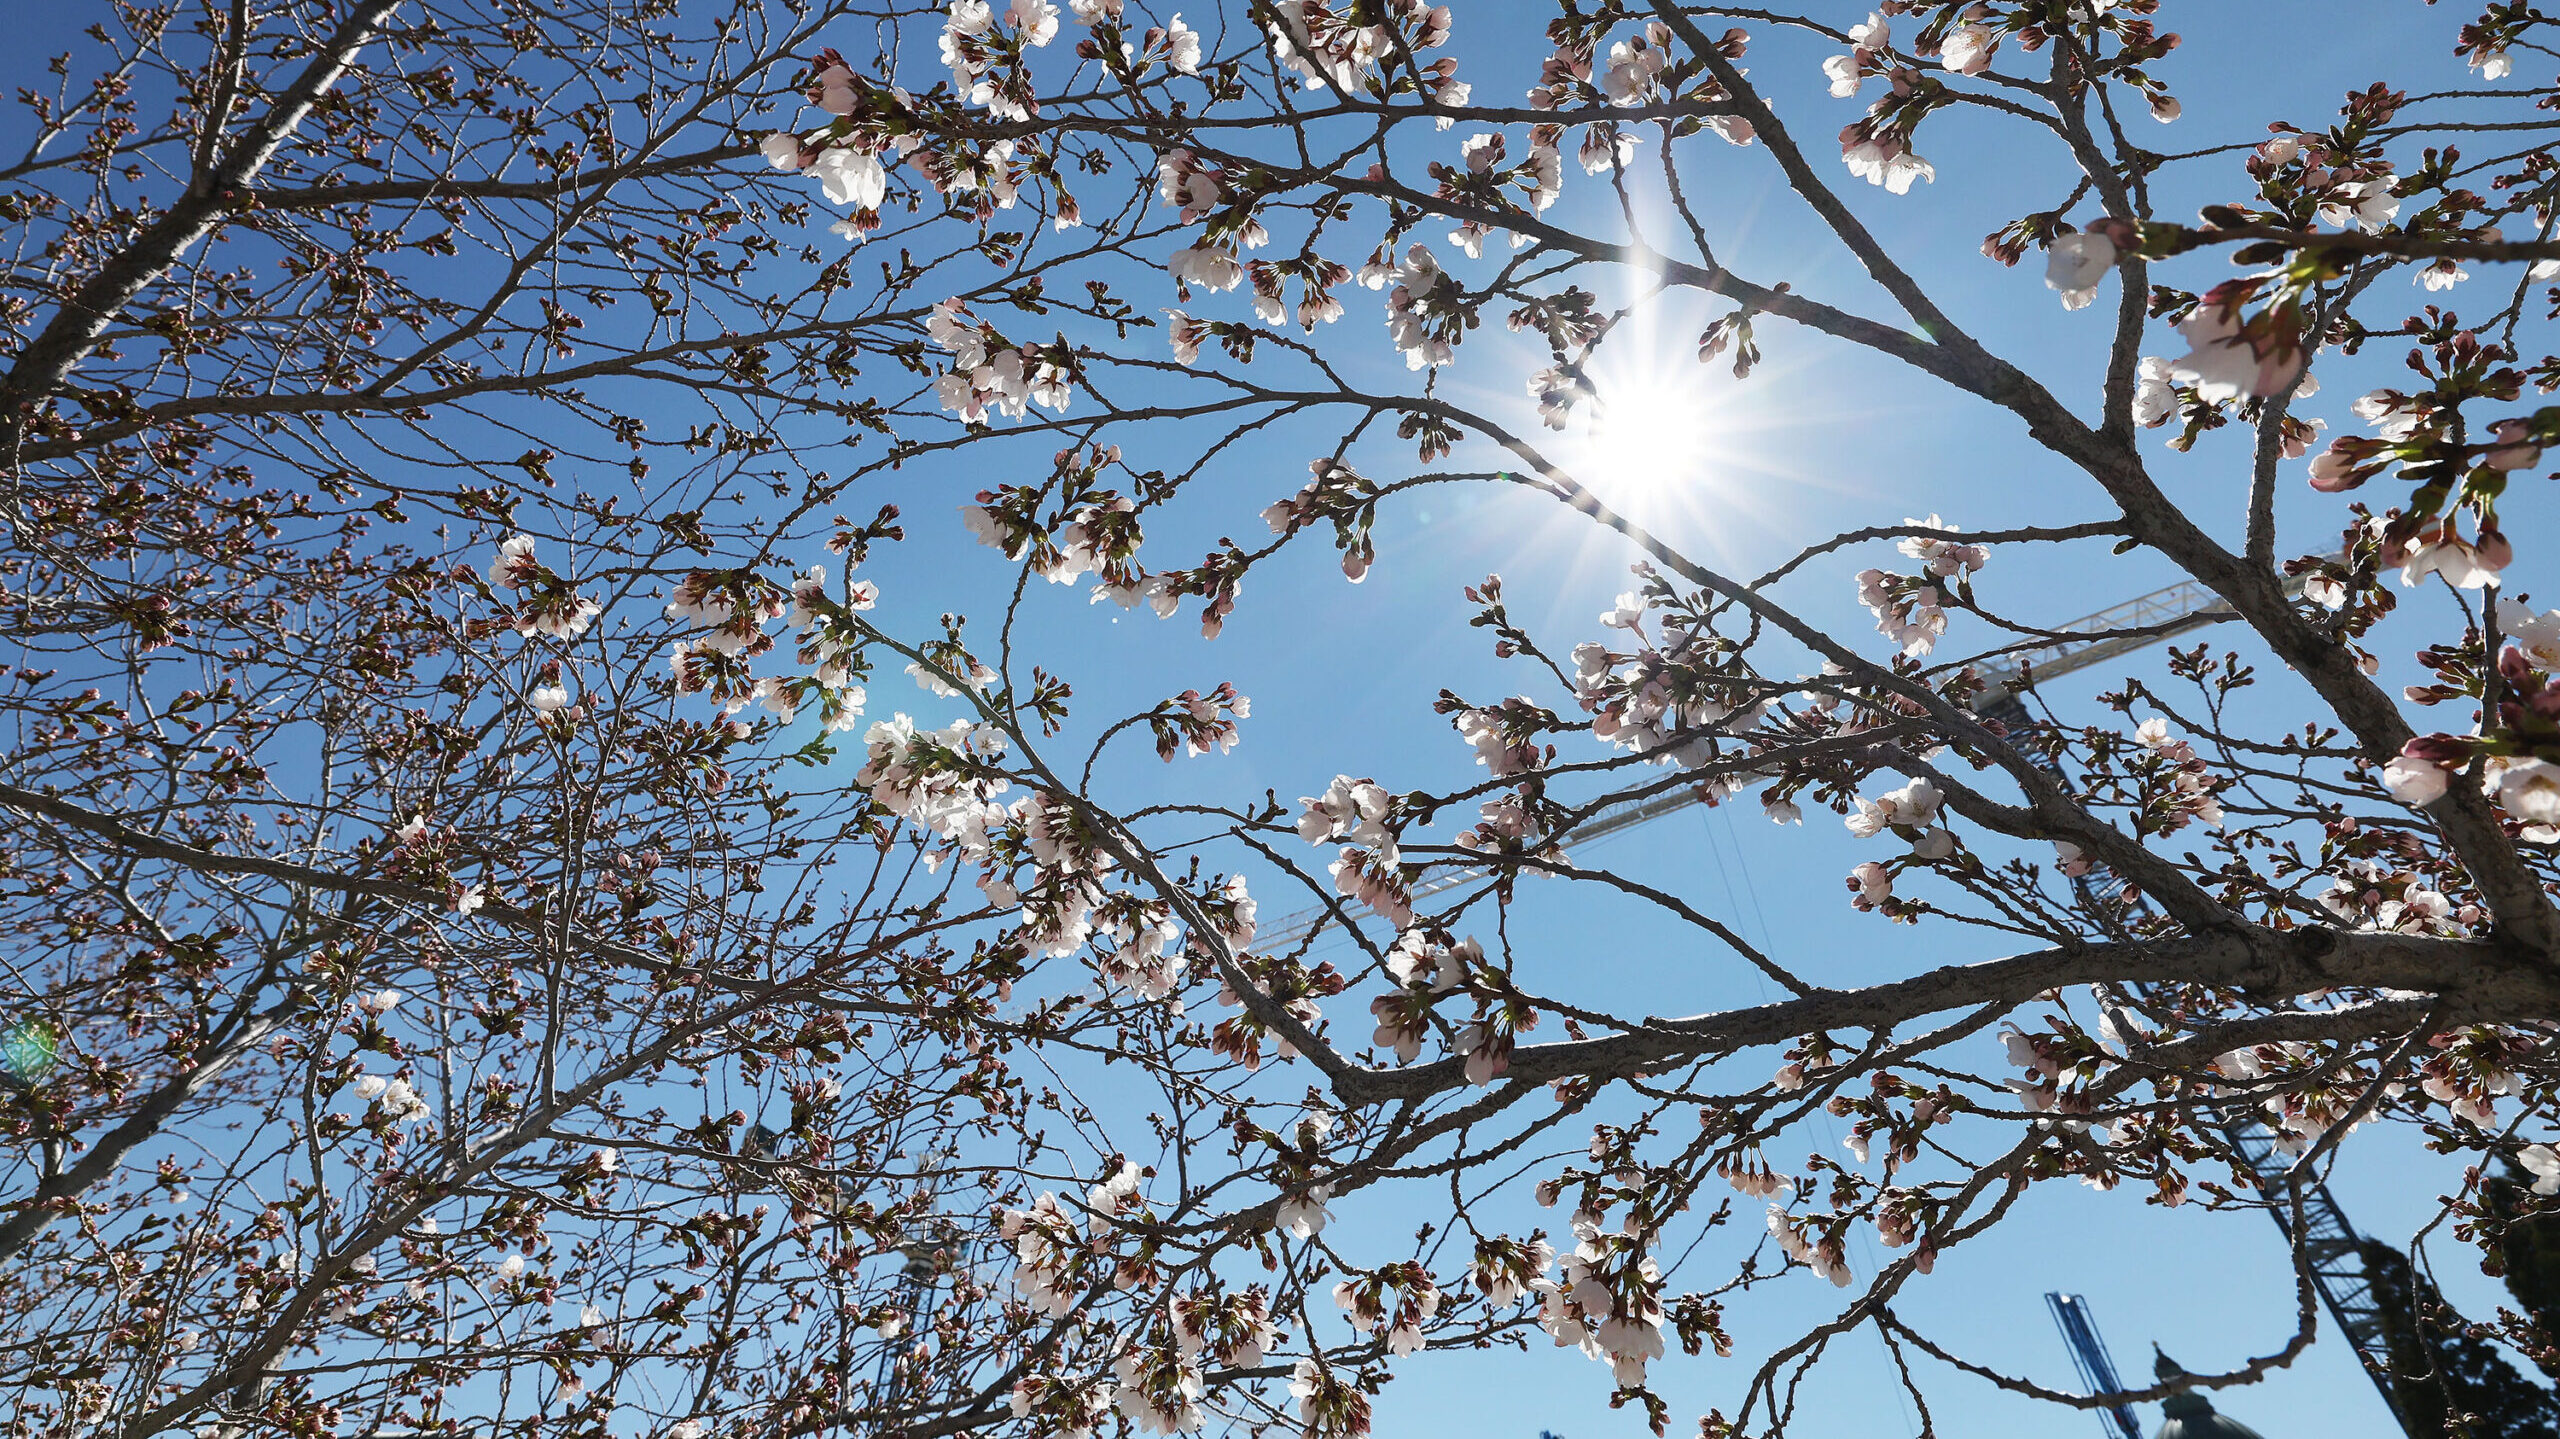 sunshine on cherry blossoms shown, april temperatures will be a little higher this year...